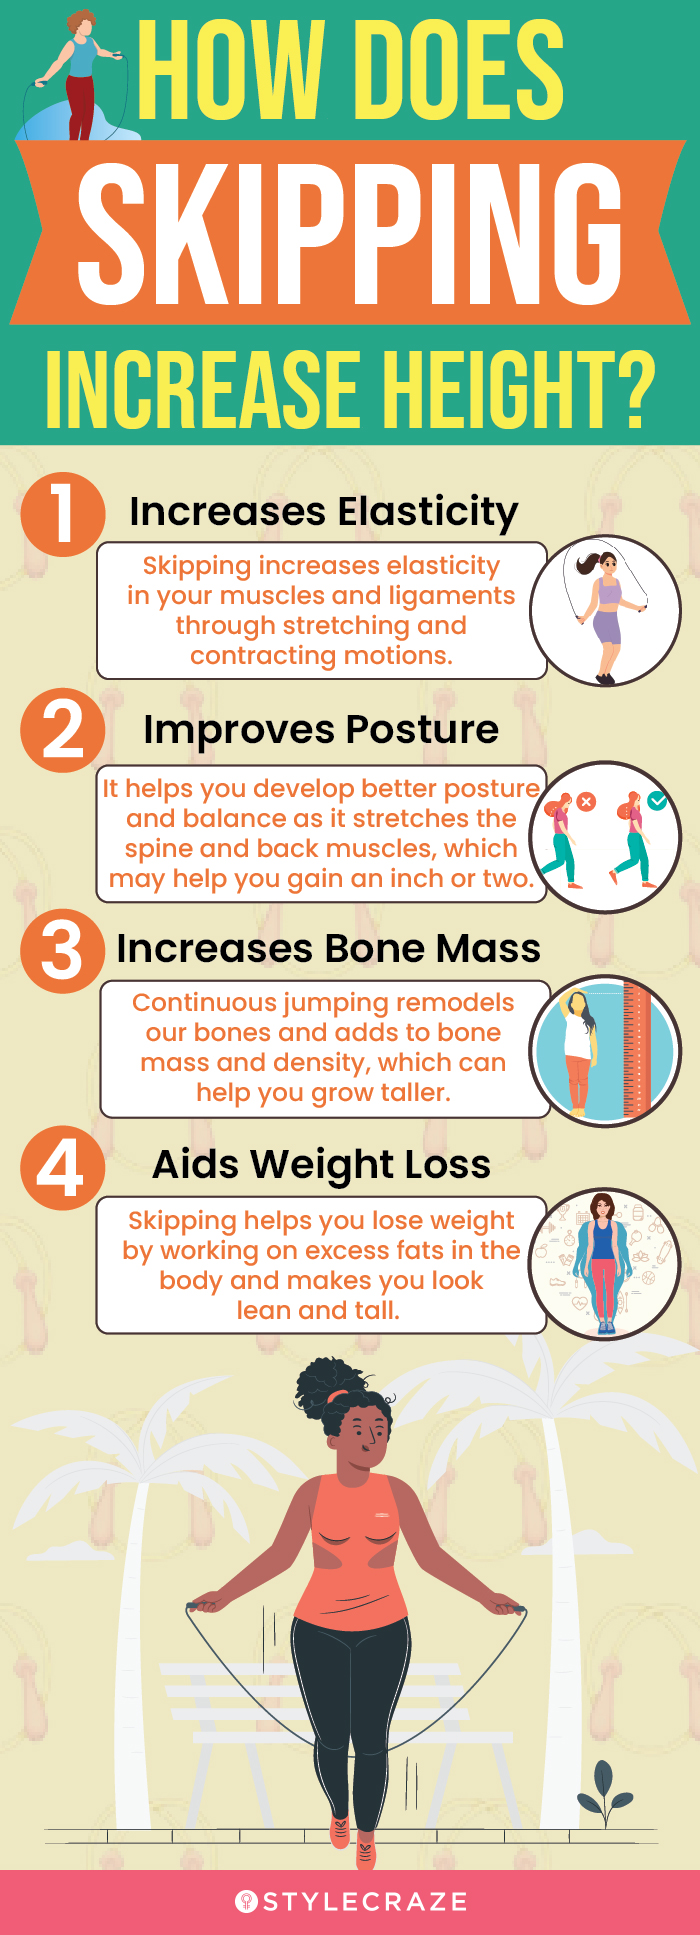 how does skipping increase height (infographic)